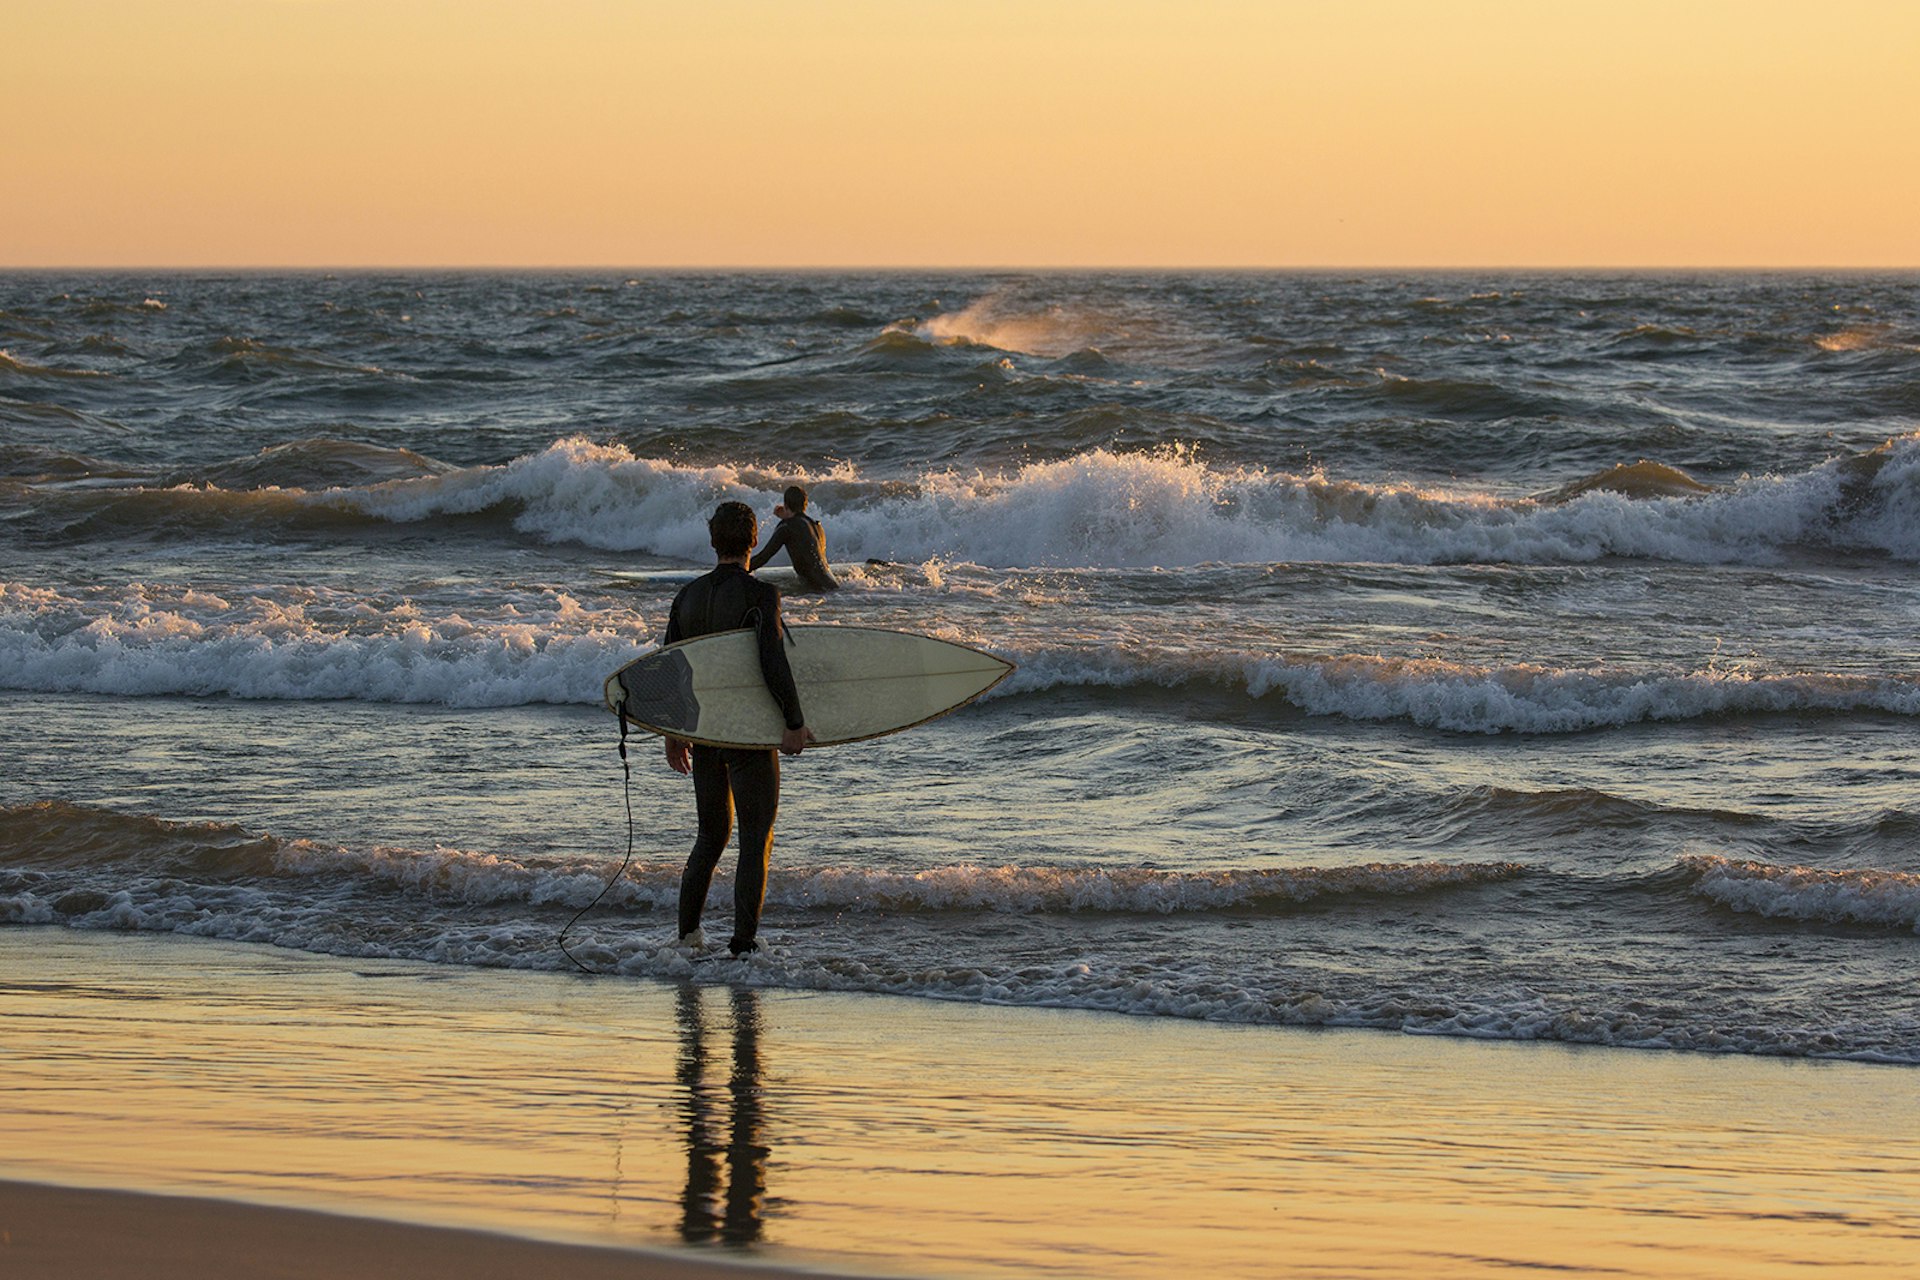 Man holding a surfboard and wearing a westuit stands on a white sand beach at sunset on Lake Michigan, watching a second man surf a wave